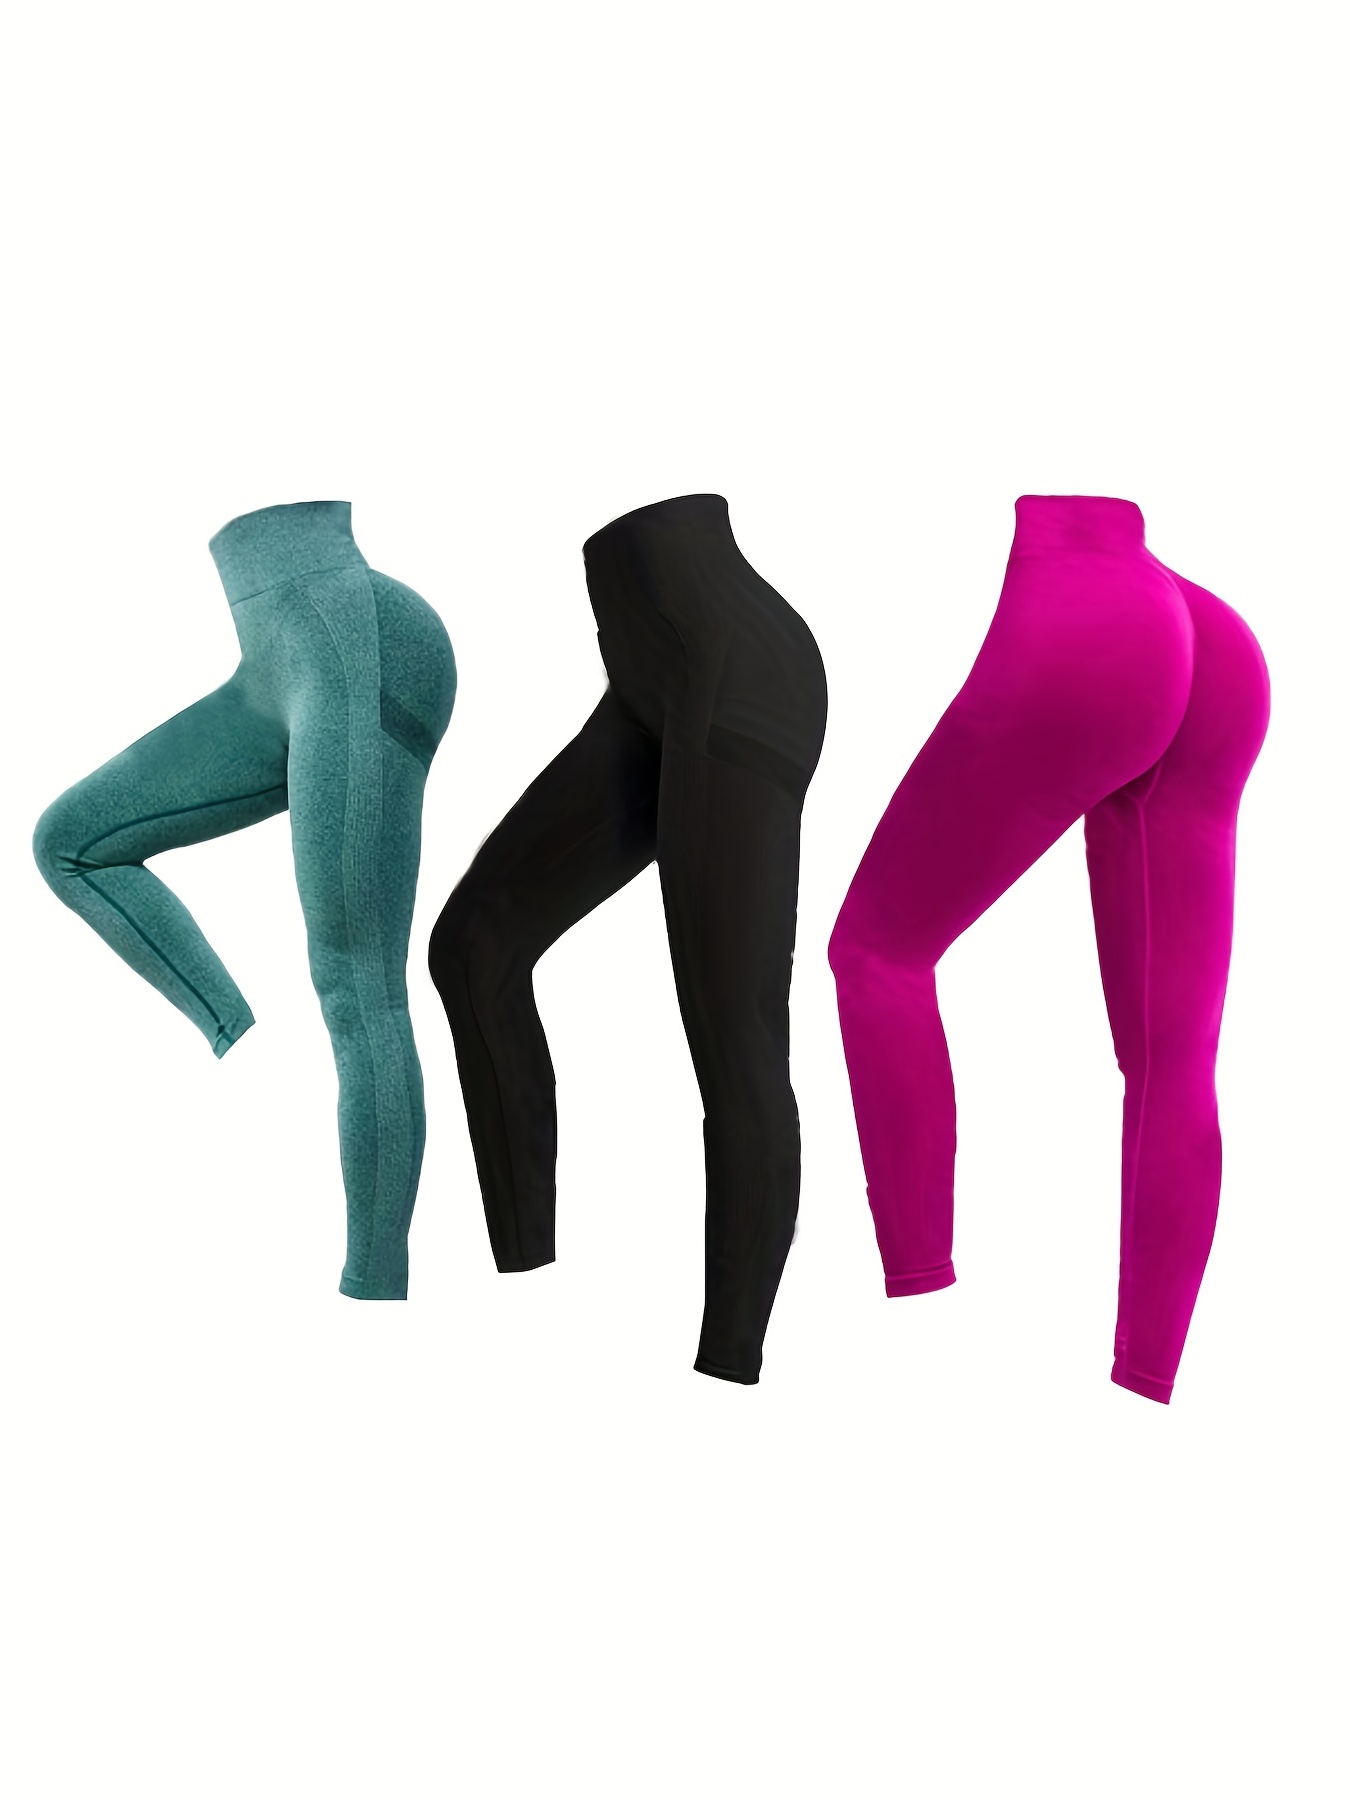 Peach High Waist Yoga Pants For Women Sexy, Elastic, And Tight Fitting  Fitness Exercise Gym Tights Women From Junwei123, $20.13